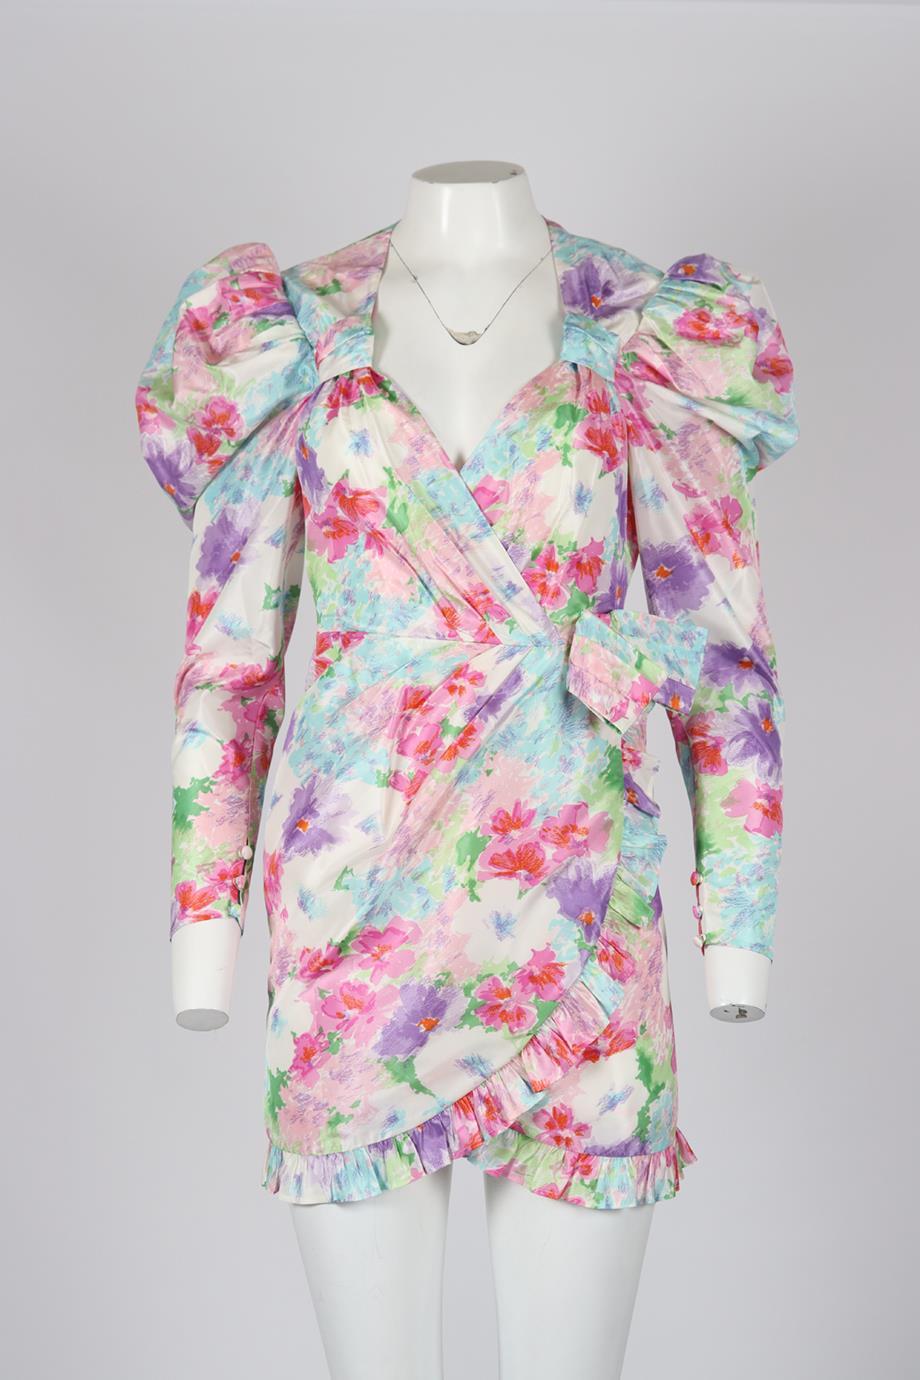 Alessandra Rich Ruffled Floral Print Silk Mini Dress. Multi. Long Sleeve. V-Neck. Zip fastening - Back. 100% Silk. 100% Cupro. 100% Polyamide. IT 40 (UK 8, US 4, FR 36). Bust: 31.9 in. Waist: 26.3 in. Hips: 31.5 in. Length: 33 in. Condition: Used.